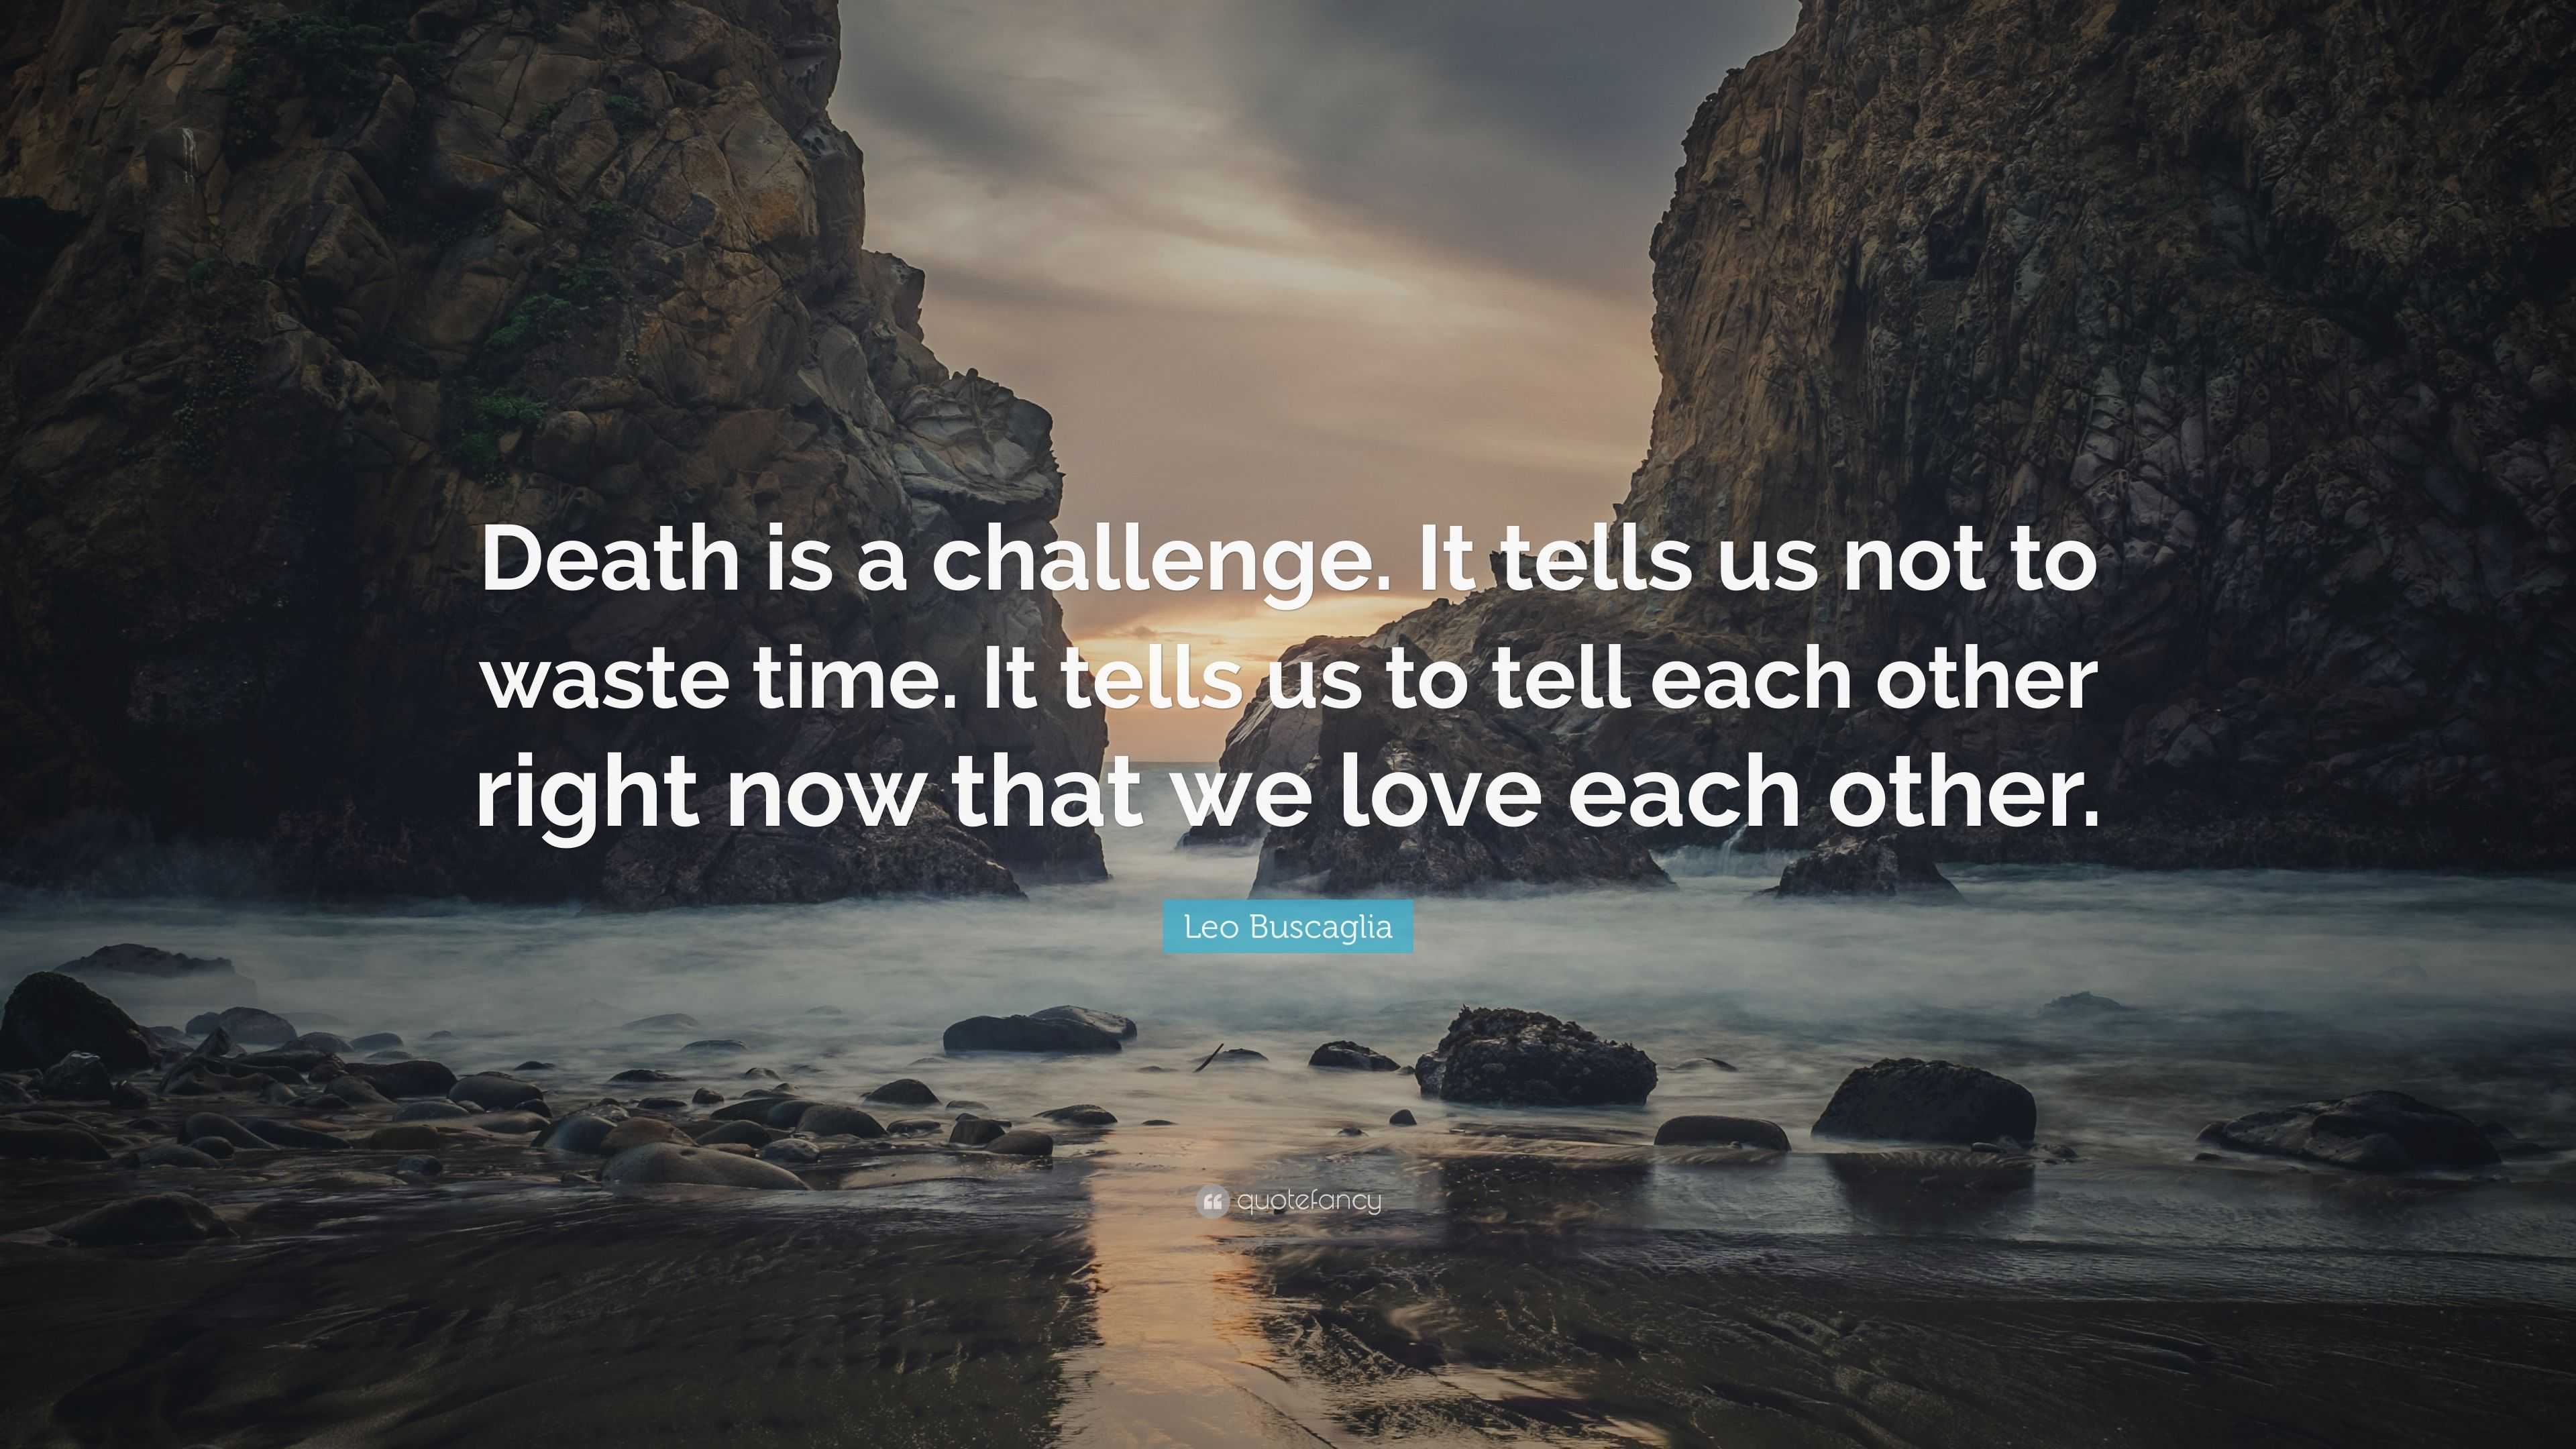 Leo Buscaglia Quote Death Is A Challenge It Tells Us Not To Waste Time It Tells Us To Tell Each Other Right Now That We Love Each Other 24 Wallpapers Quotefancy